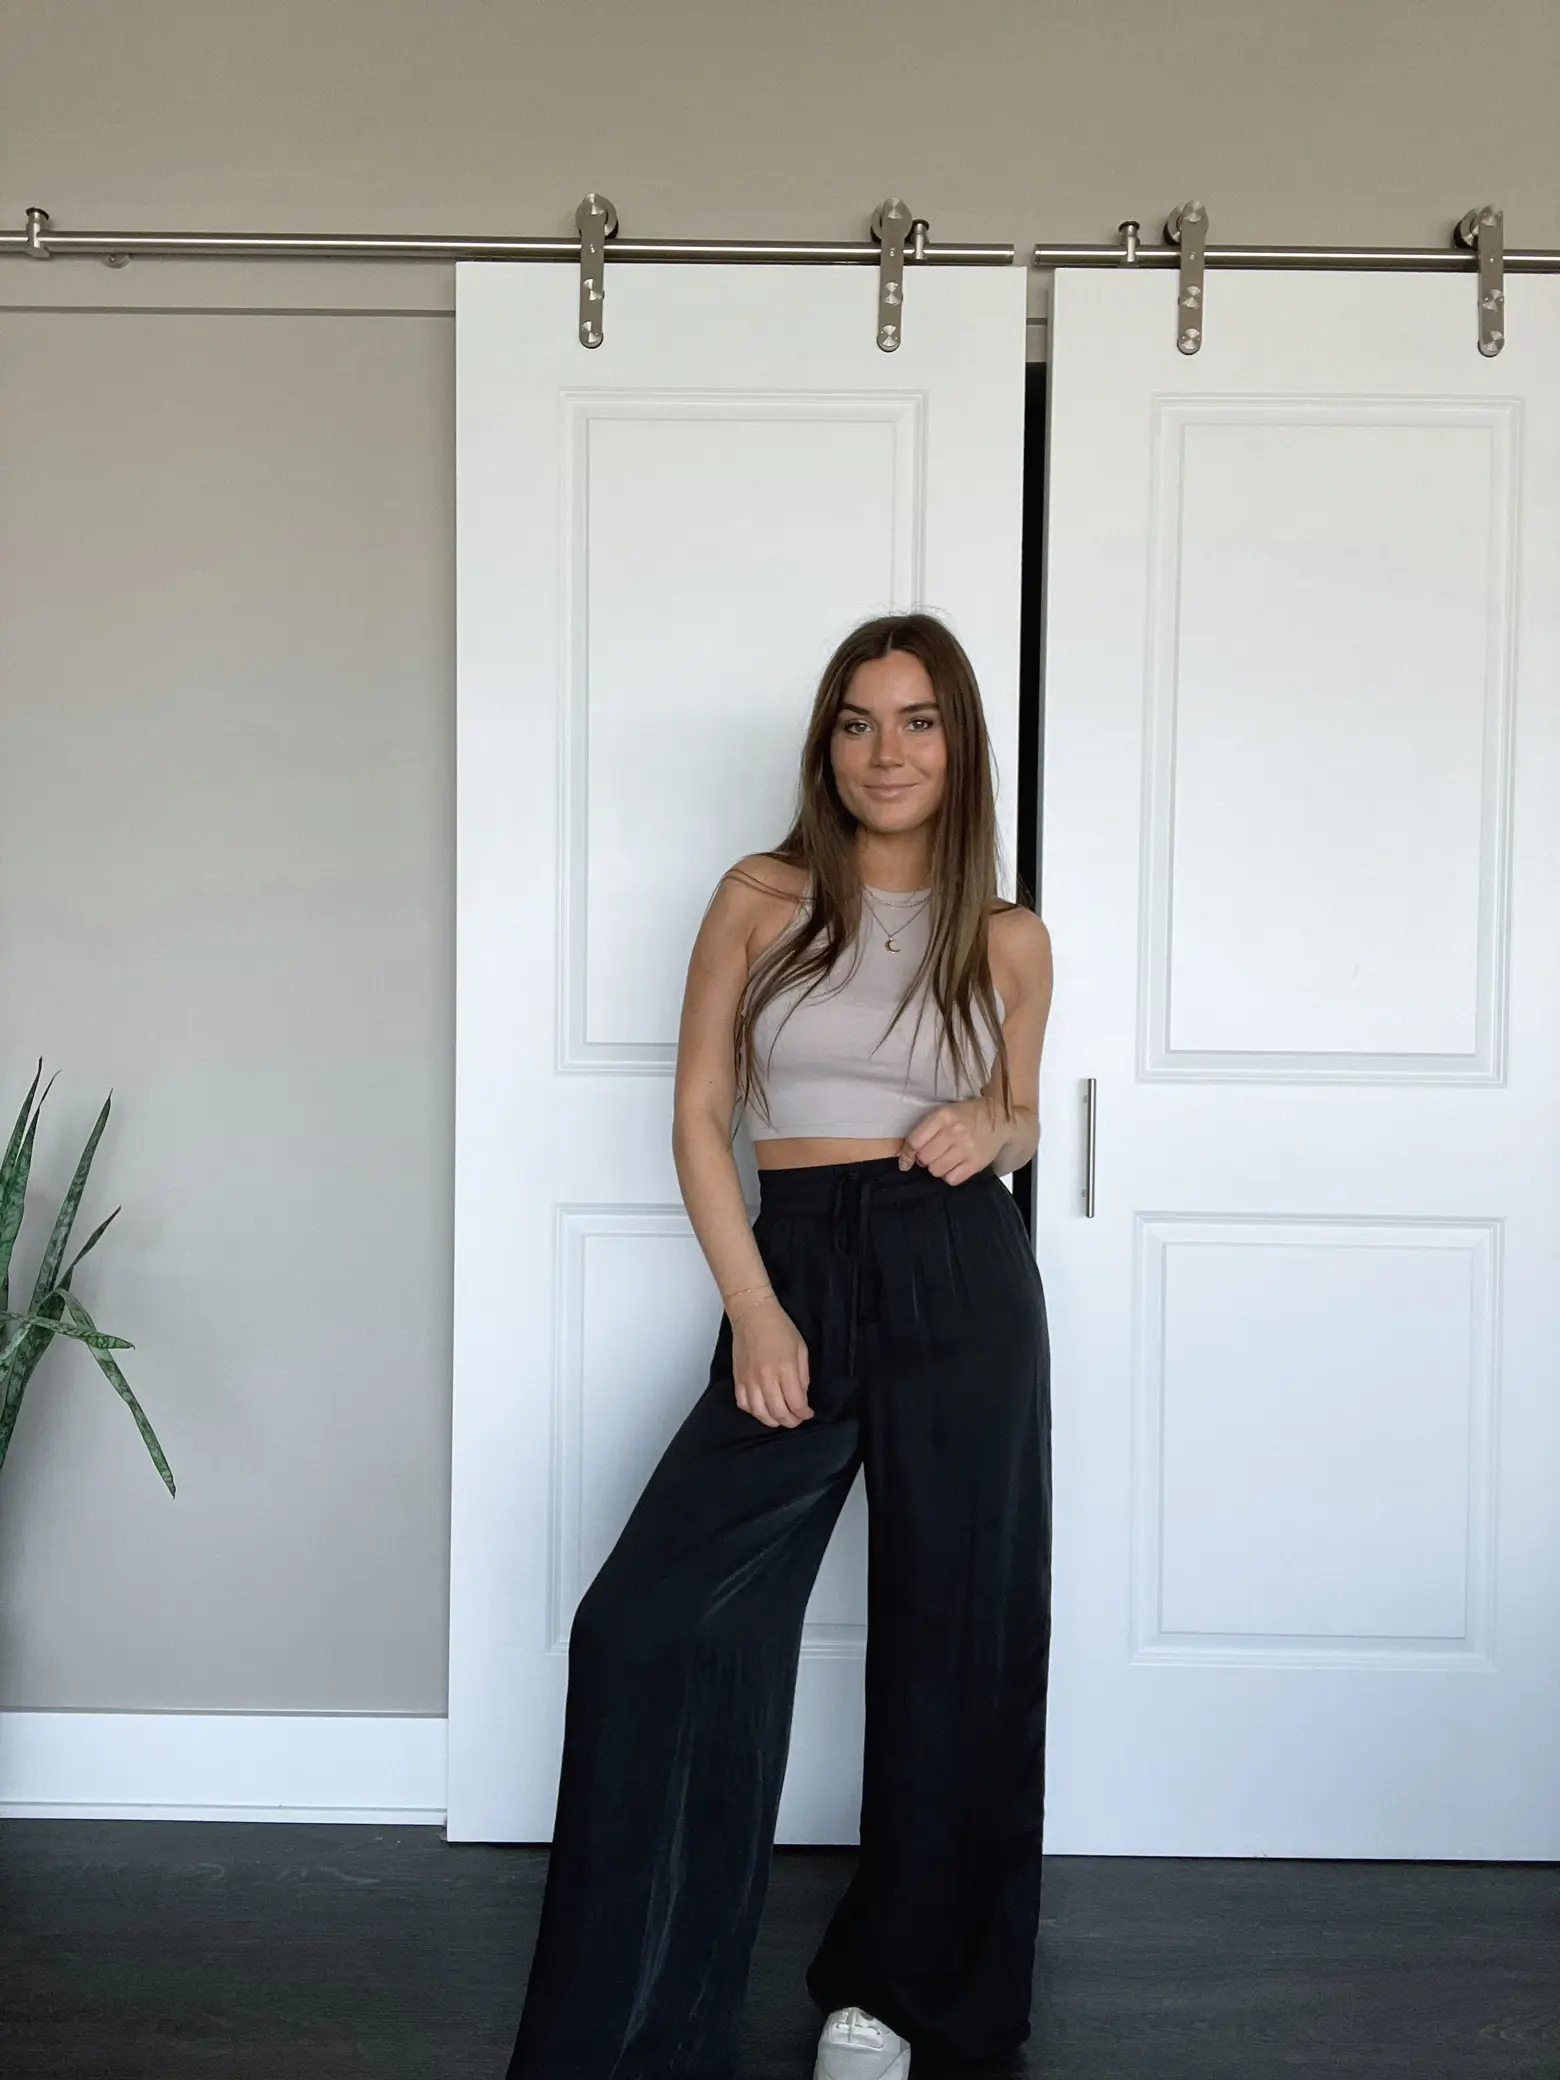 HOW TO STYLE WIDE LEG PANTS FOR SPRING 